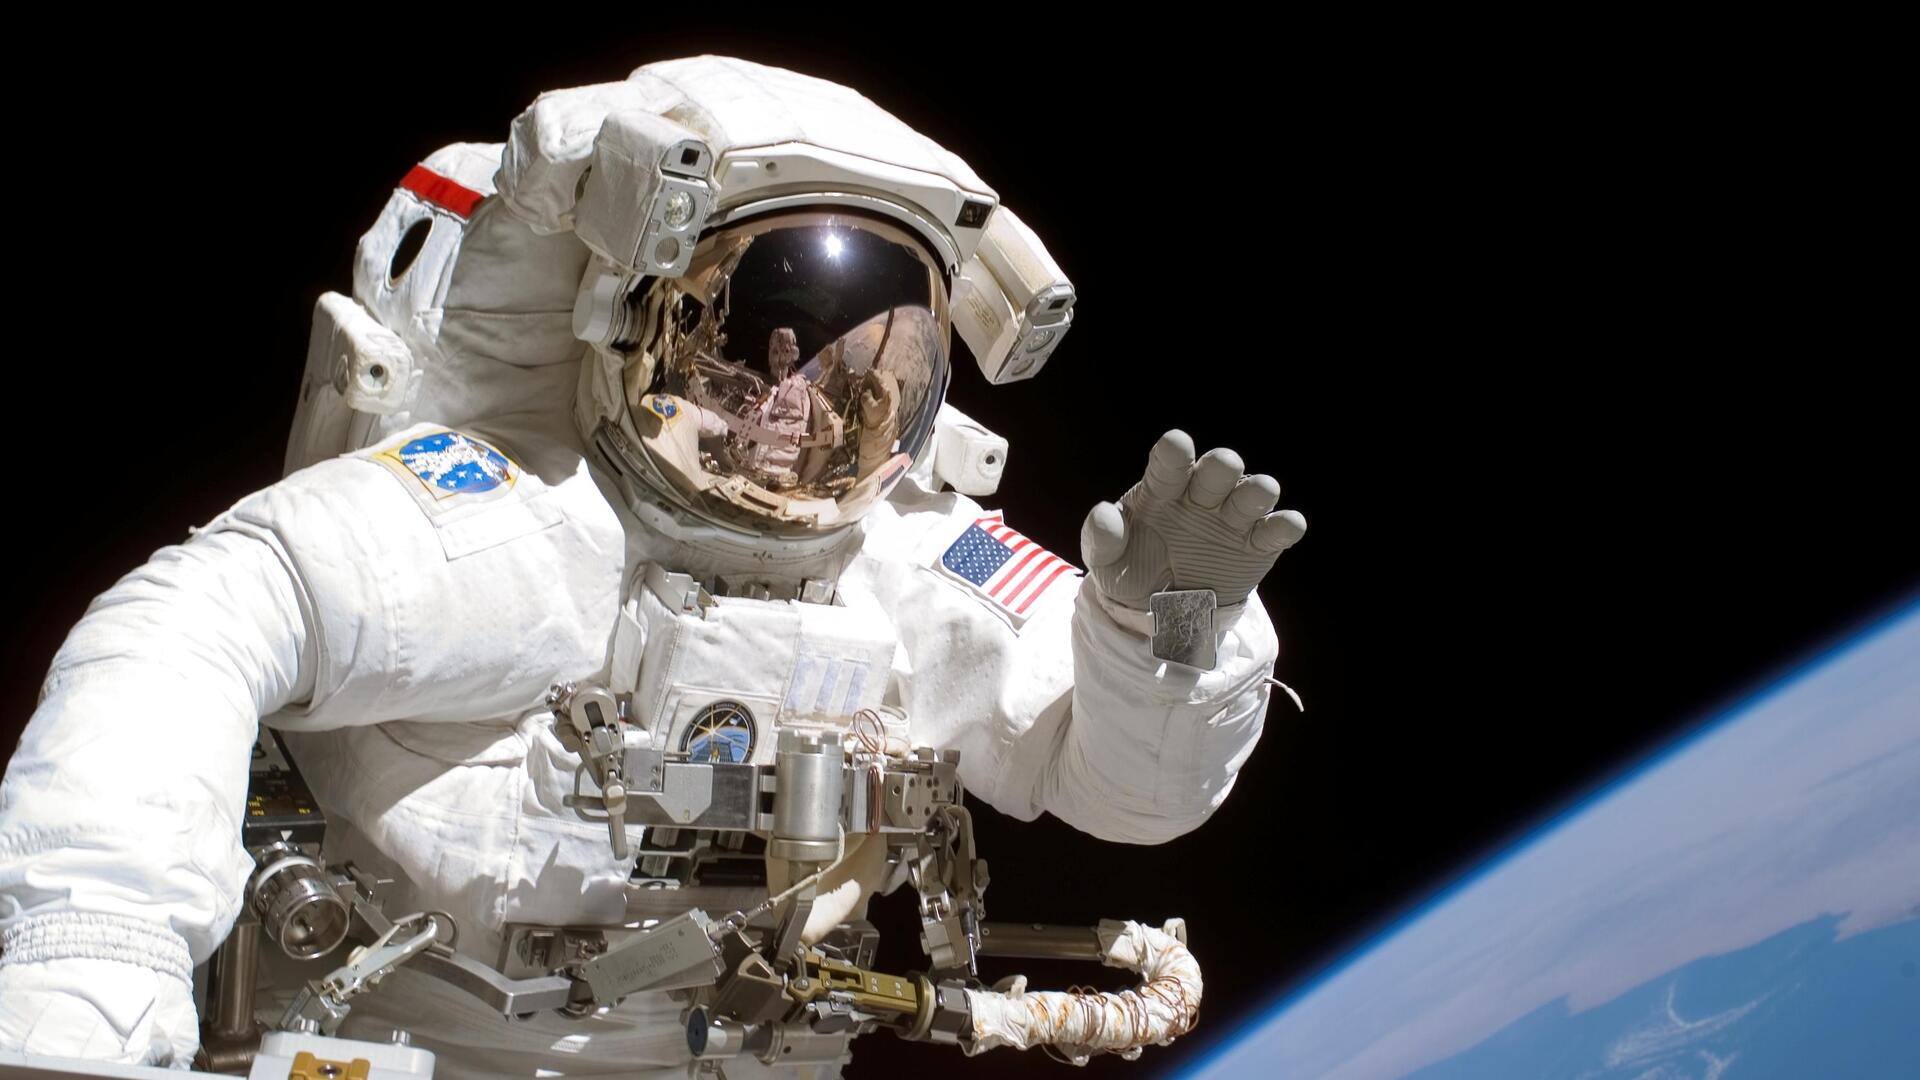 What happens if astronaut dies in space? Know NASA's protocols